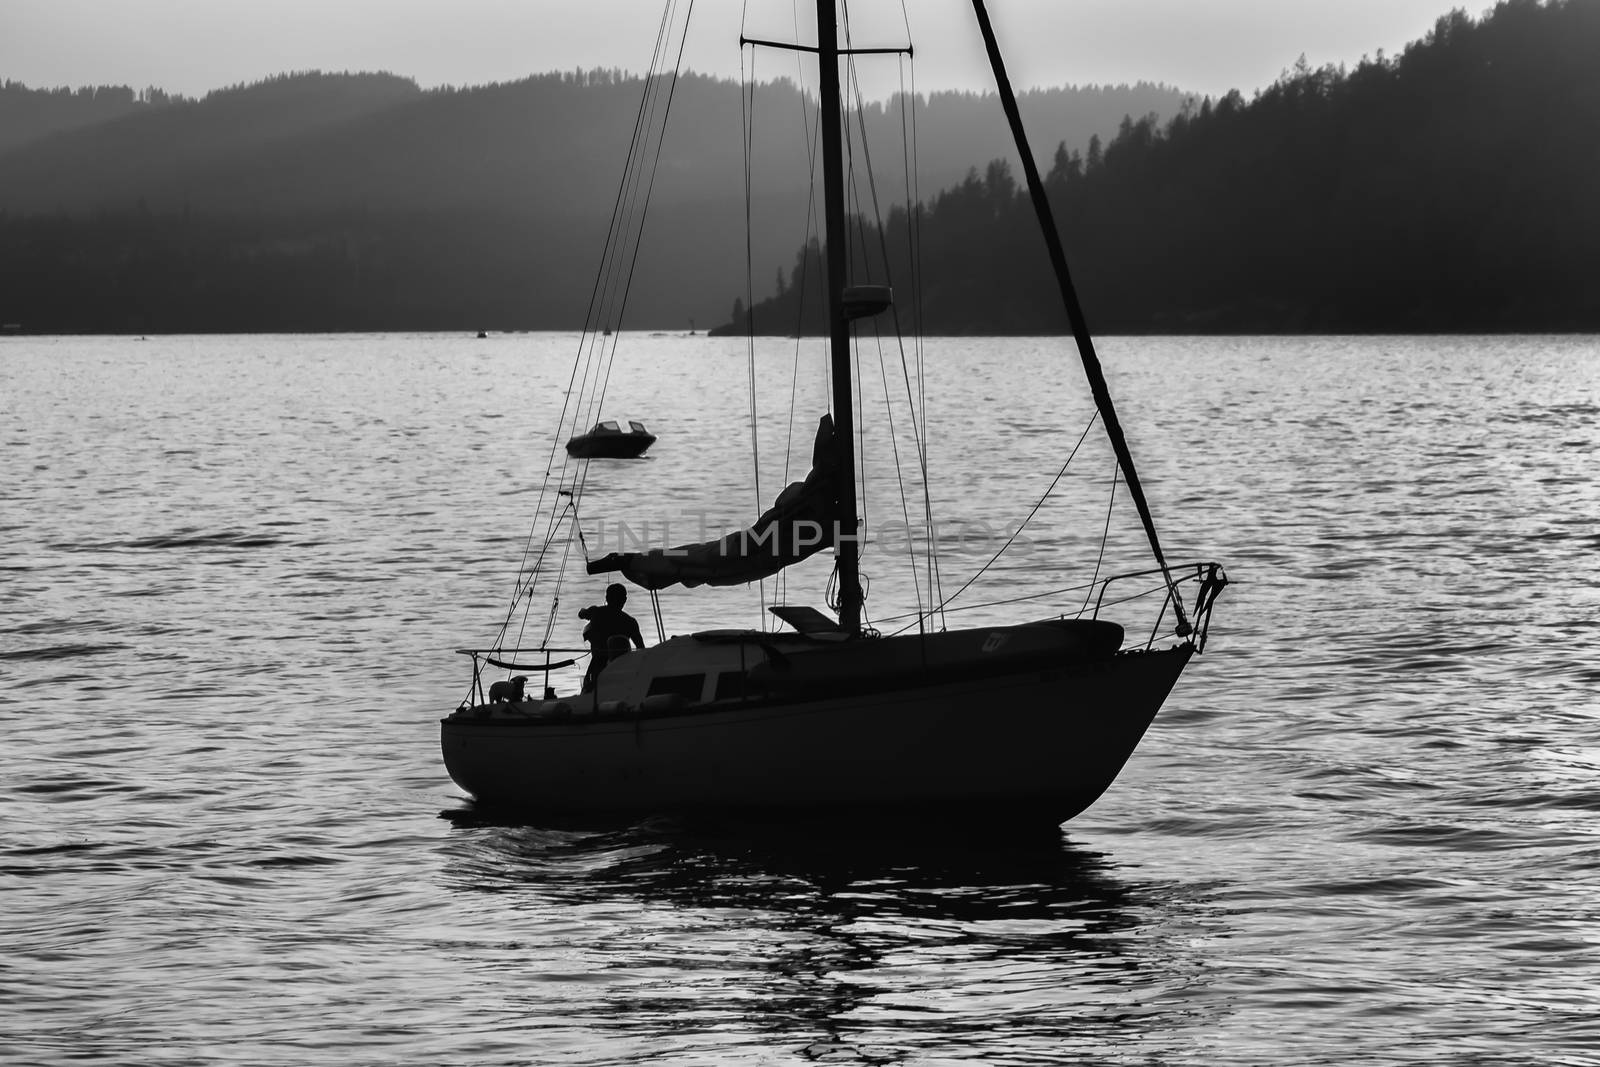 A skipper and his dog sails his boat during sunset on Lake Coeur d'Alene in Idaho in the summer.
Photo taken on: July 09th, 2015